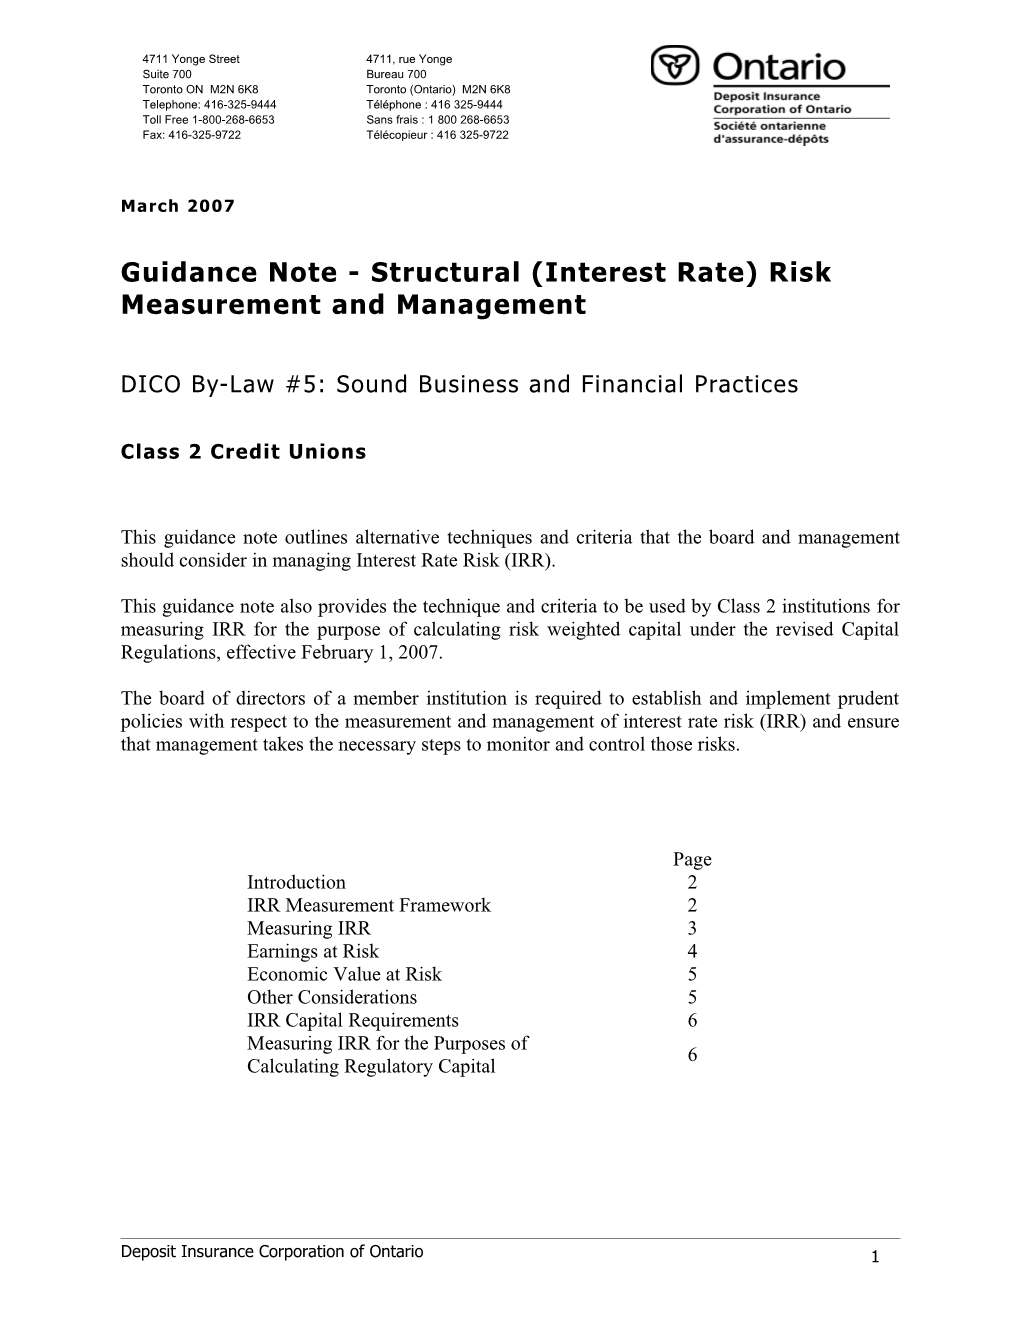 Guidance Note - Structural (Interest Rate) Risk Measurementand Management